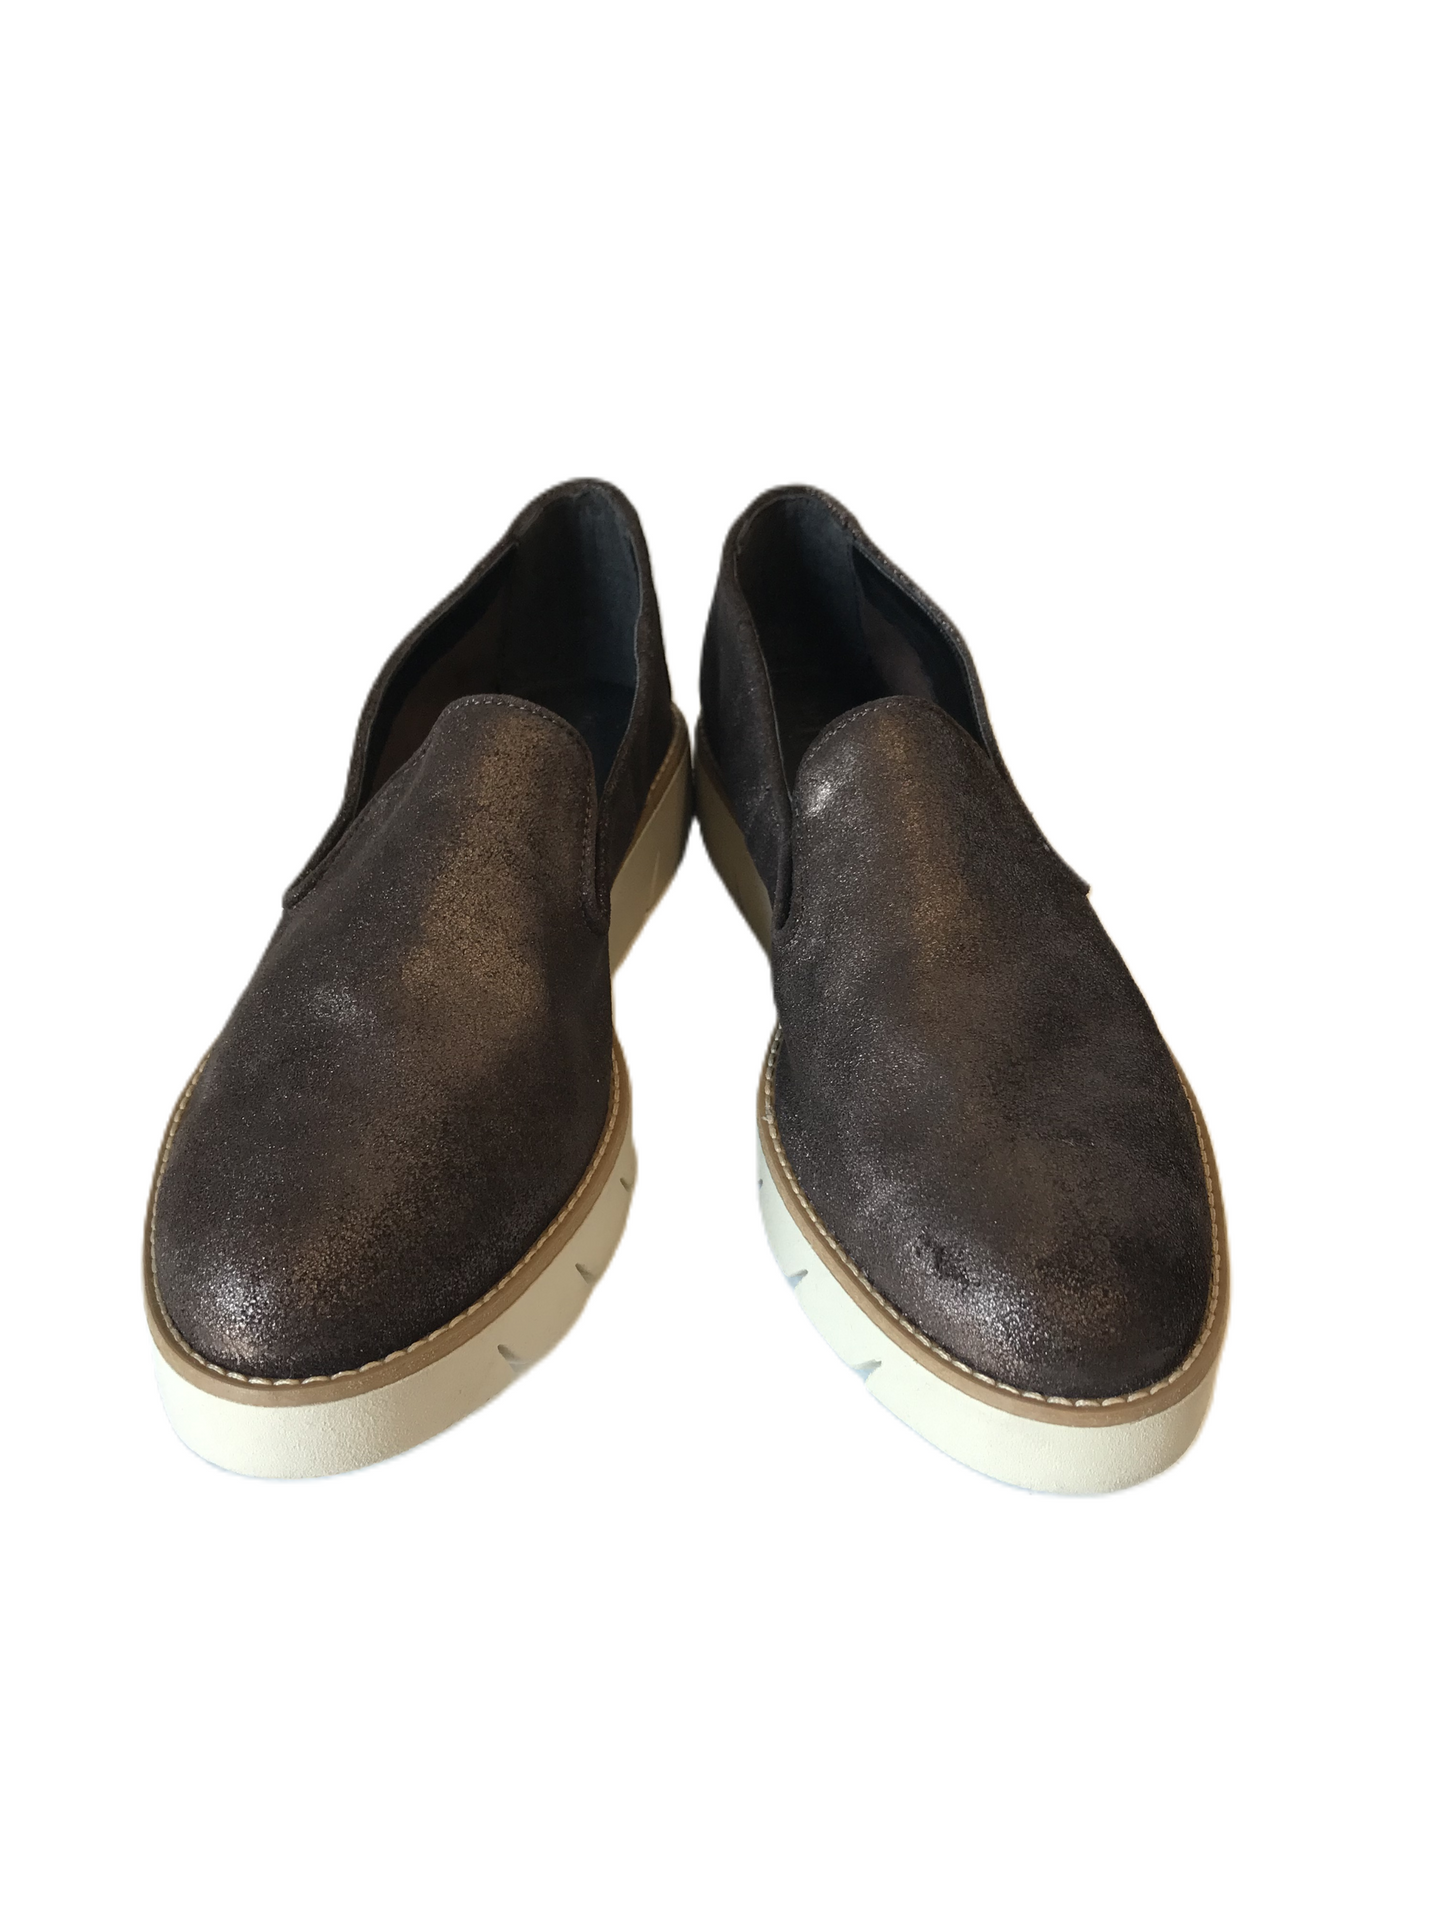 Brown Shoes Flats By The Flexx Size: 10